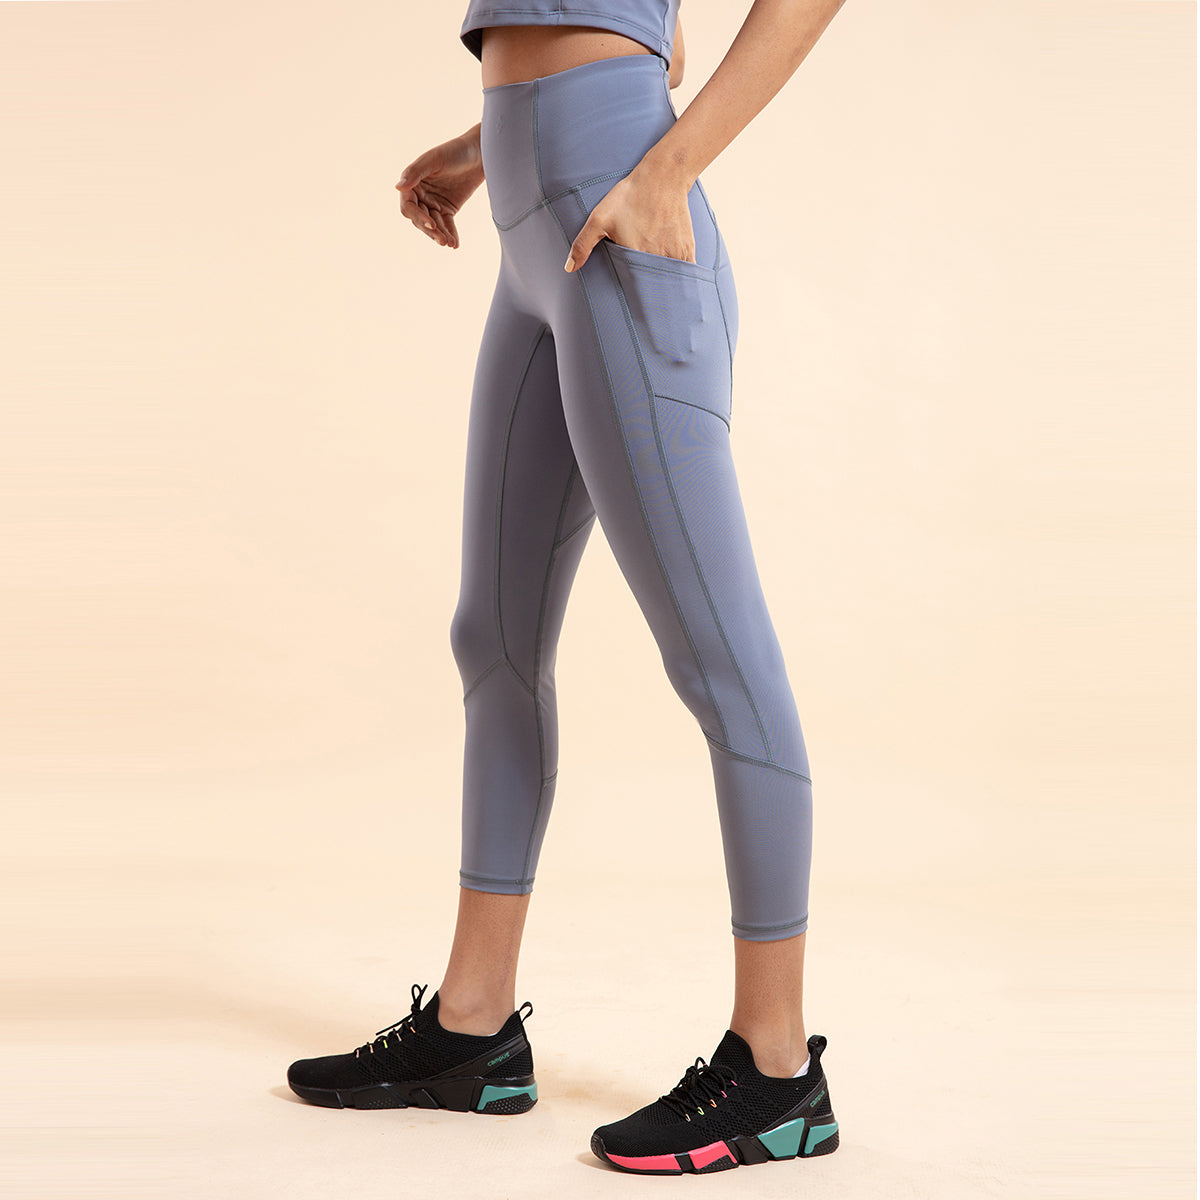 Nykd All Day High rise Classic Pannelled Leggings-NYK100 China Blue + Lime